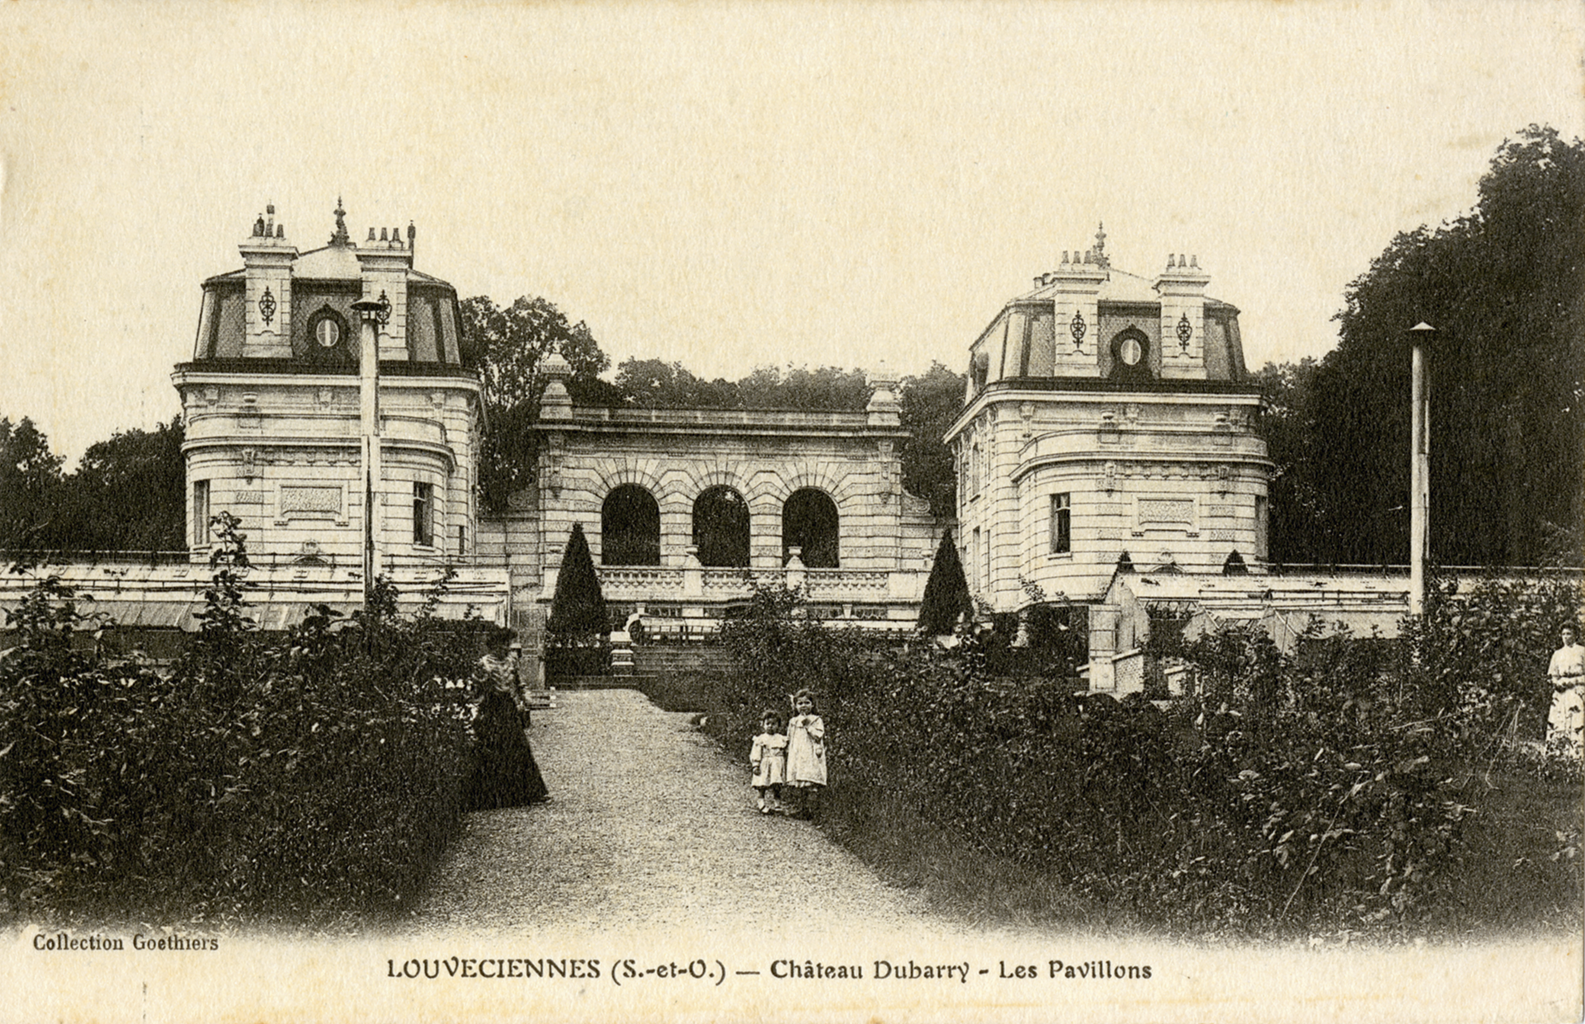 A sepia photograph of the facade of a large stone manor with three large archways and a porch. In front is a garden full of overgrown plants and bushes. Also, two women and two children who are wearing white clothing stand on a gravel path cutting through the garden.At the bottom it states &ldquo;Collection Goethiers&rdquo; &ldquo;LOUVECEINNES (S.-et-O.) Chateau - Dubarry - Les Pavillons&rdquo;